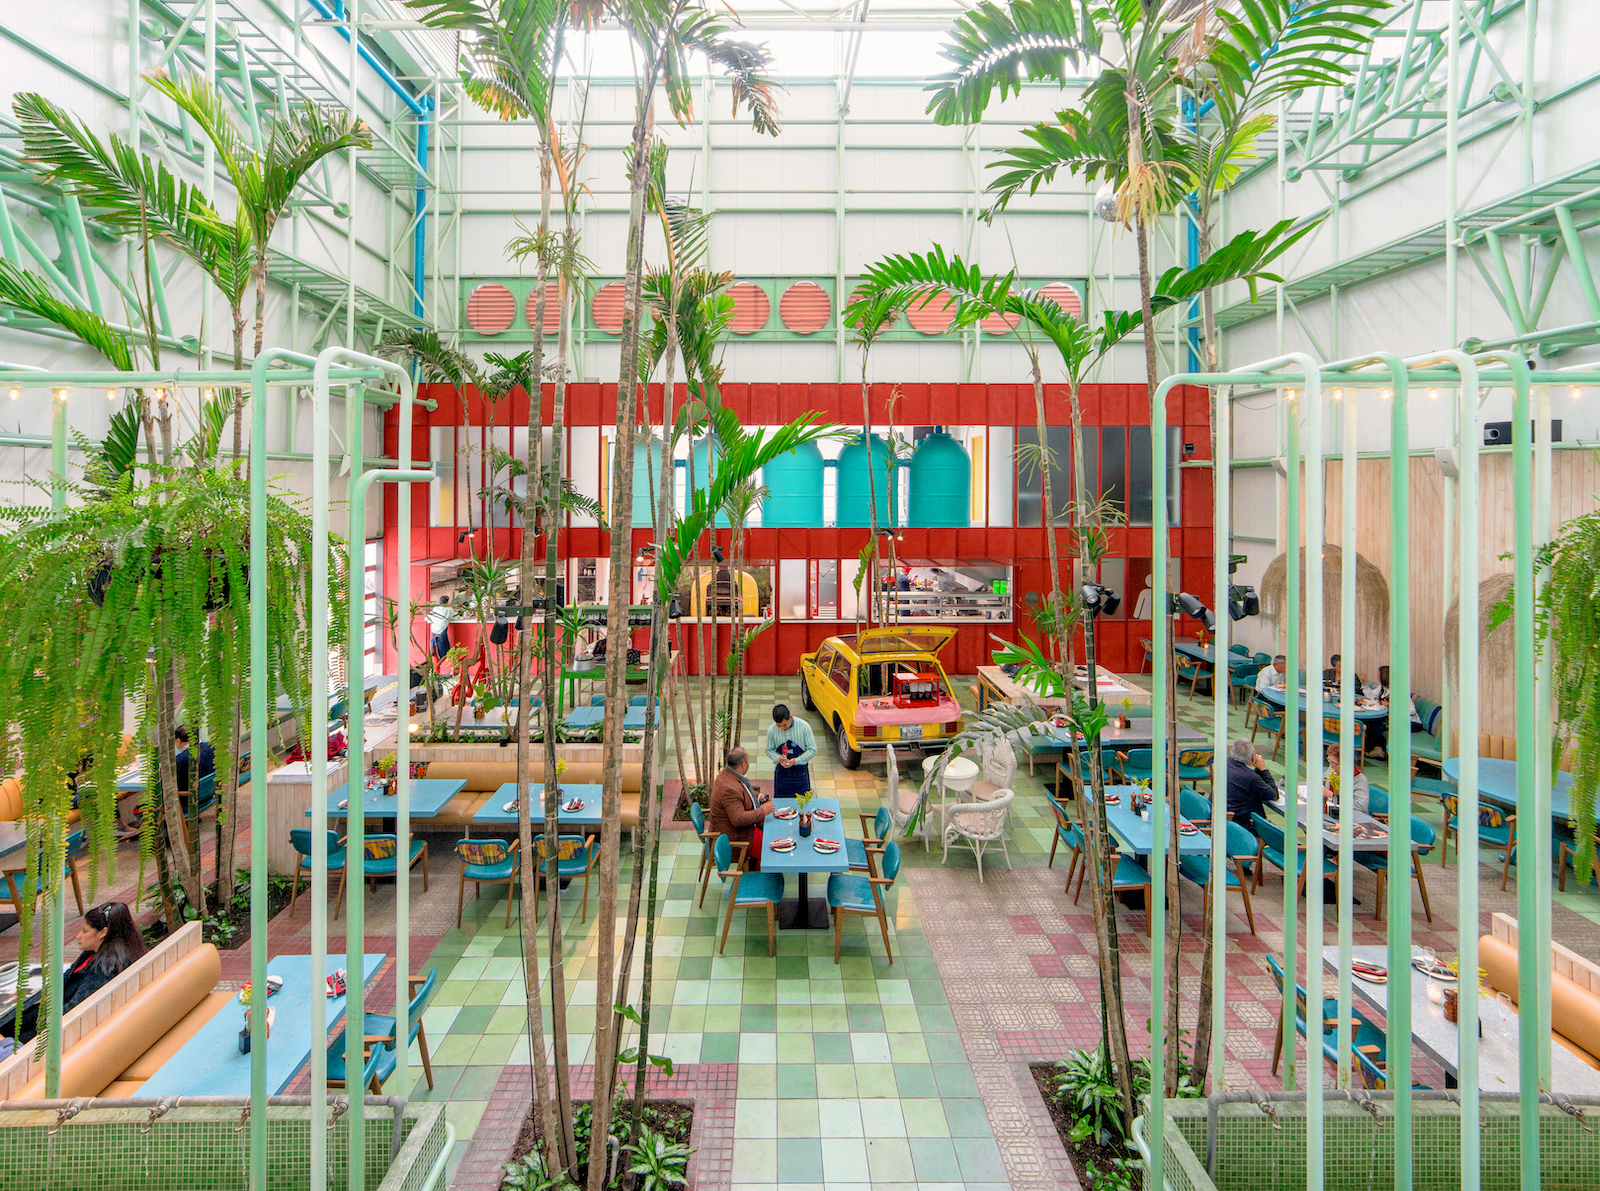 Archisearch Madero Restaurant by Taller KEN creates an indoor oasis in the city of Guatemala